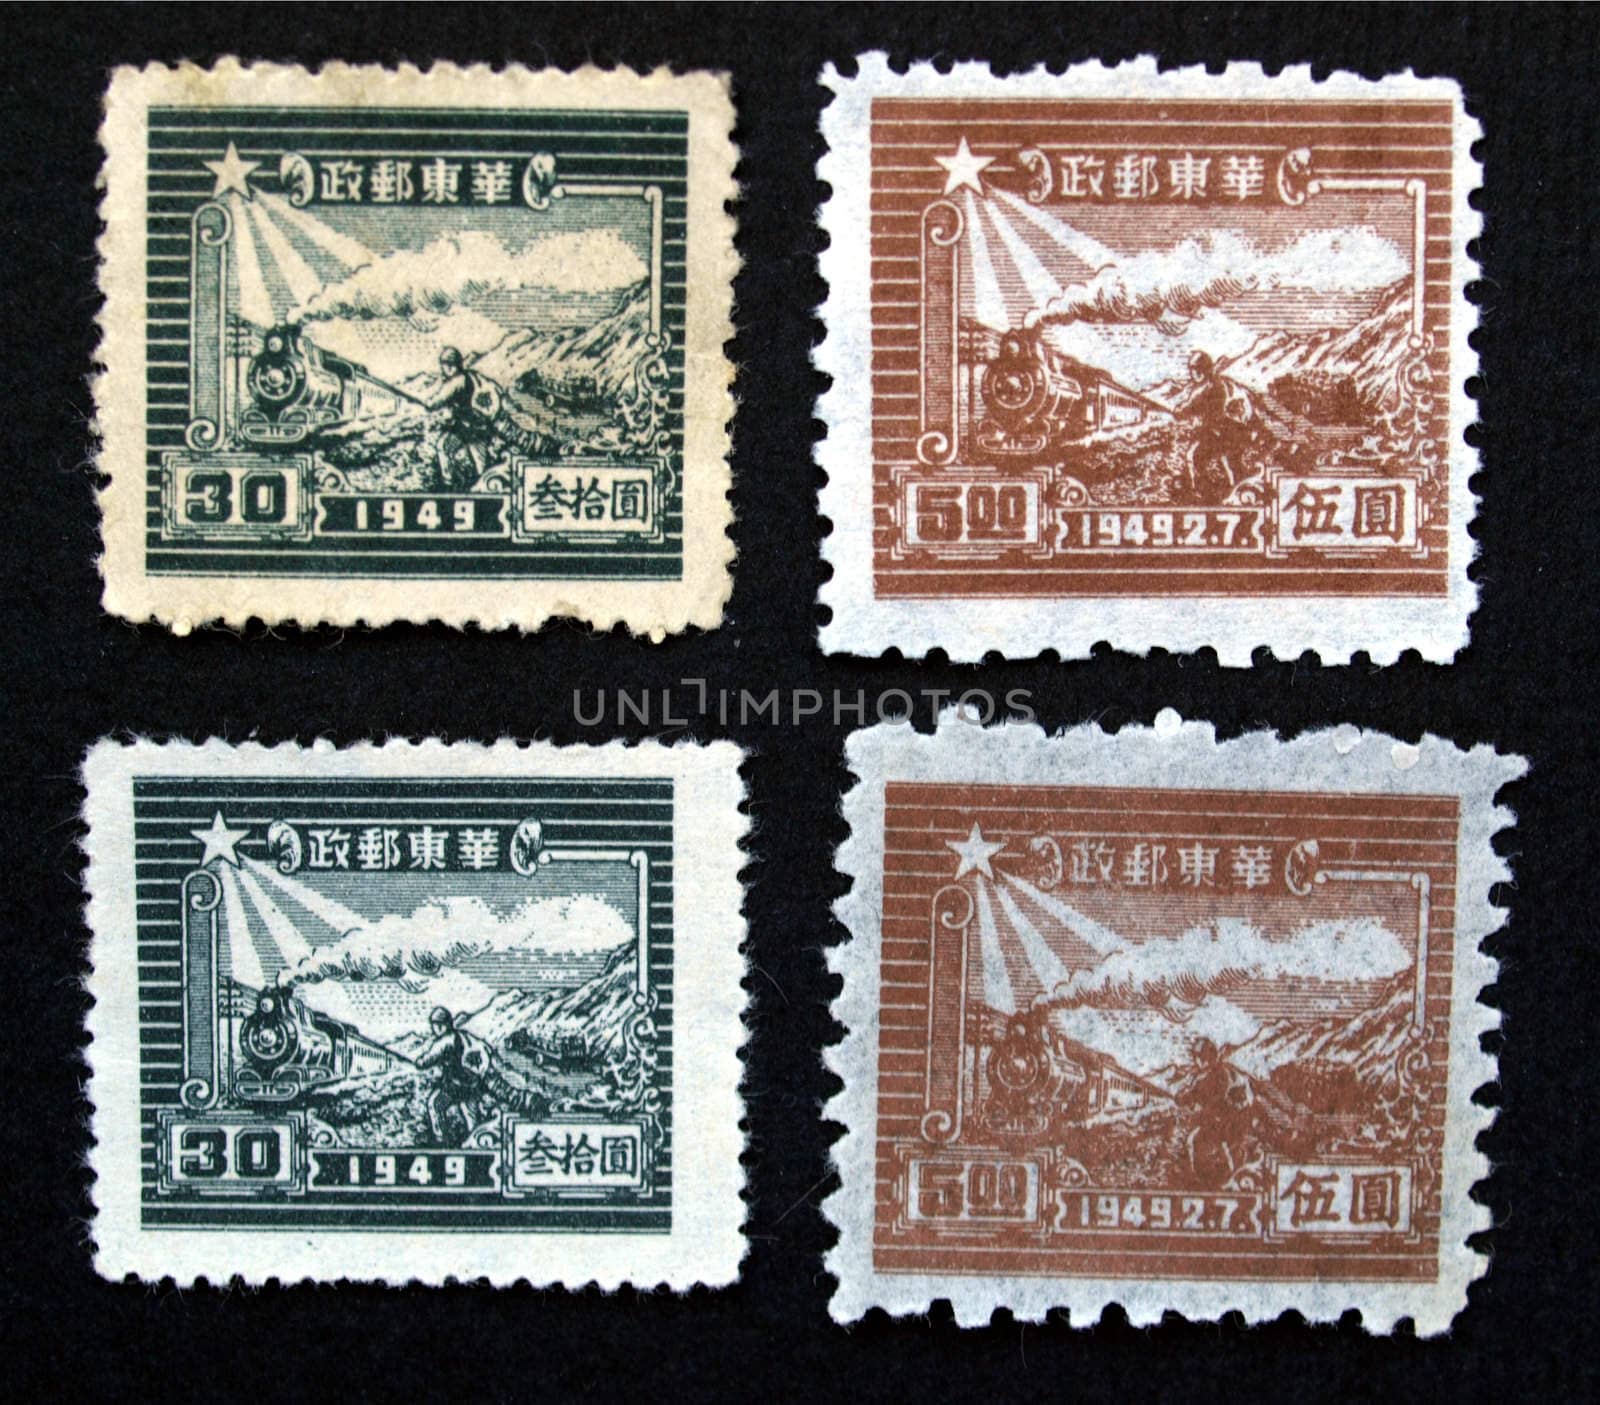 China stamps by paolo77